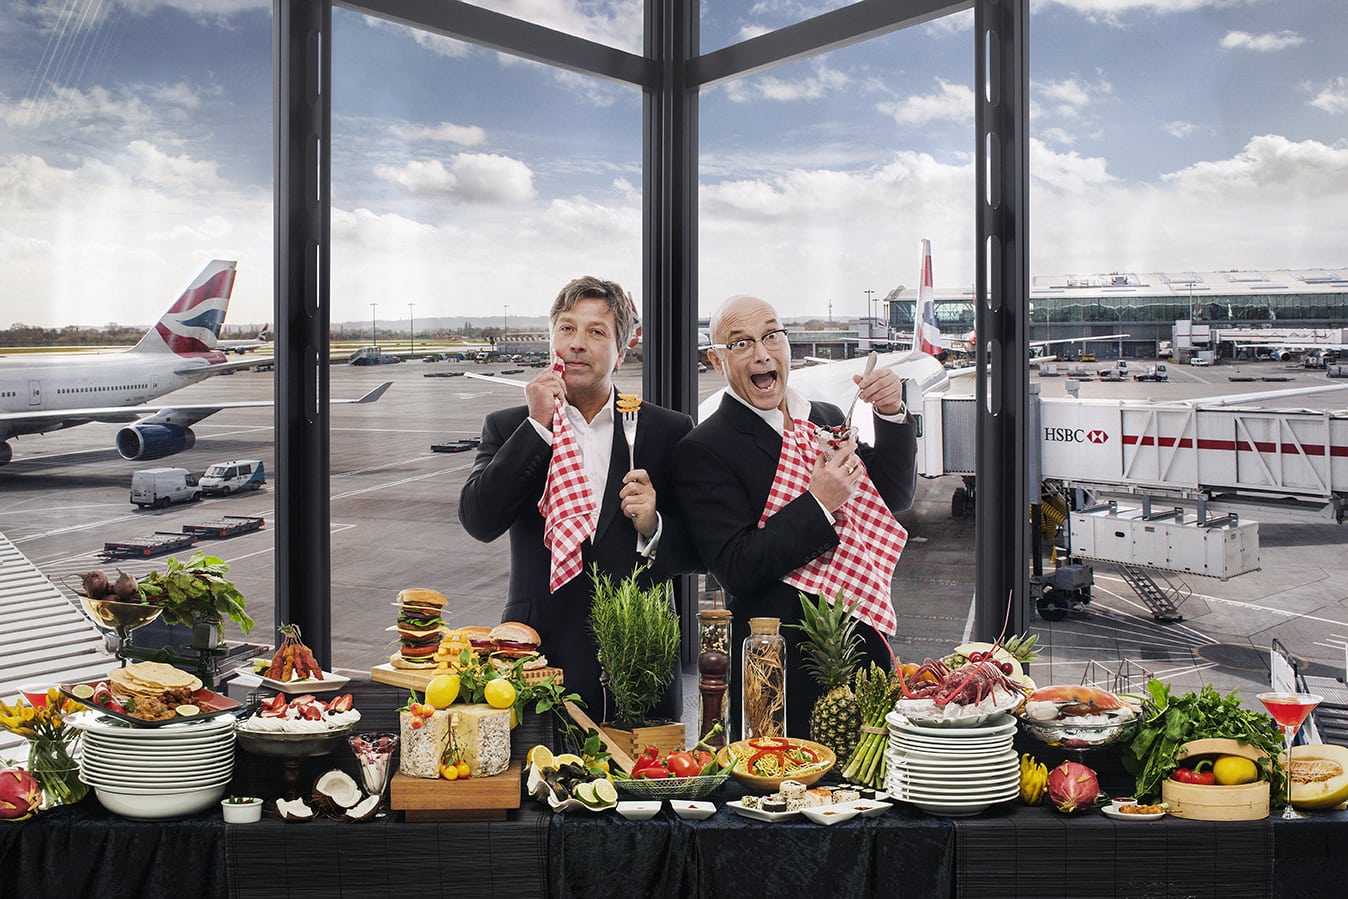 John Torode and Gregg Wallace appointed official taste buds of Heathrow. 